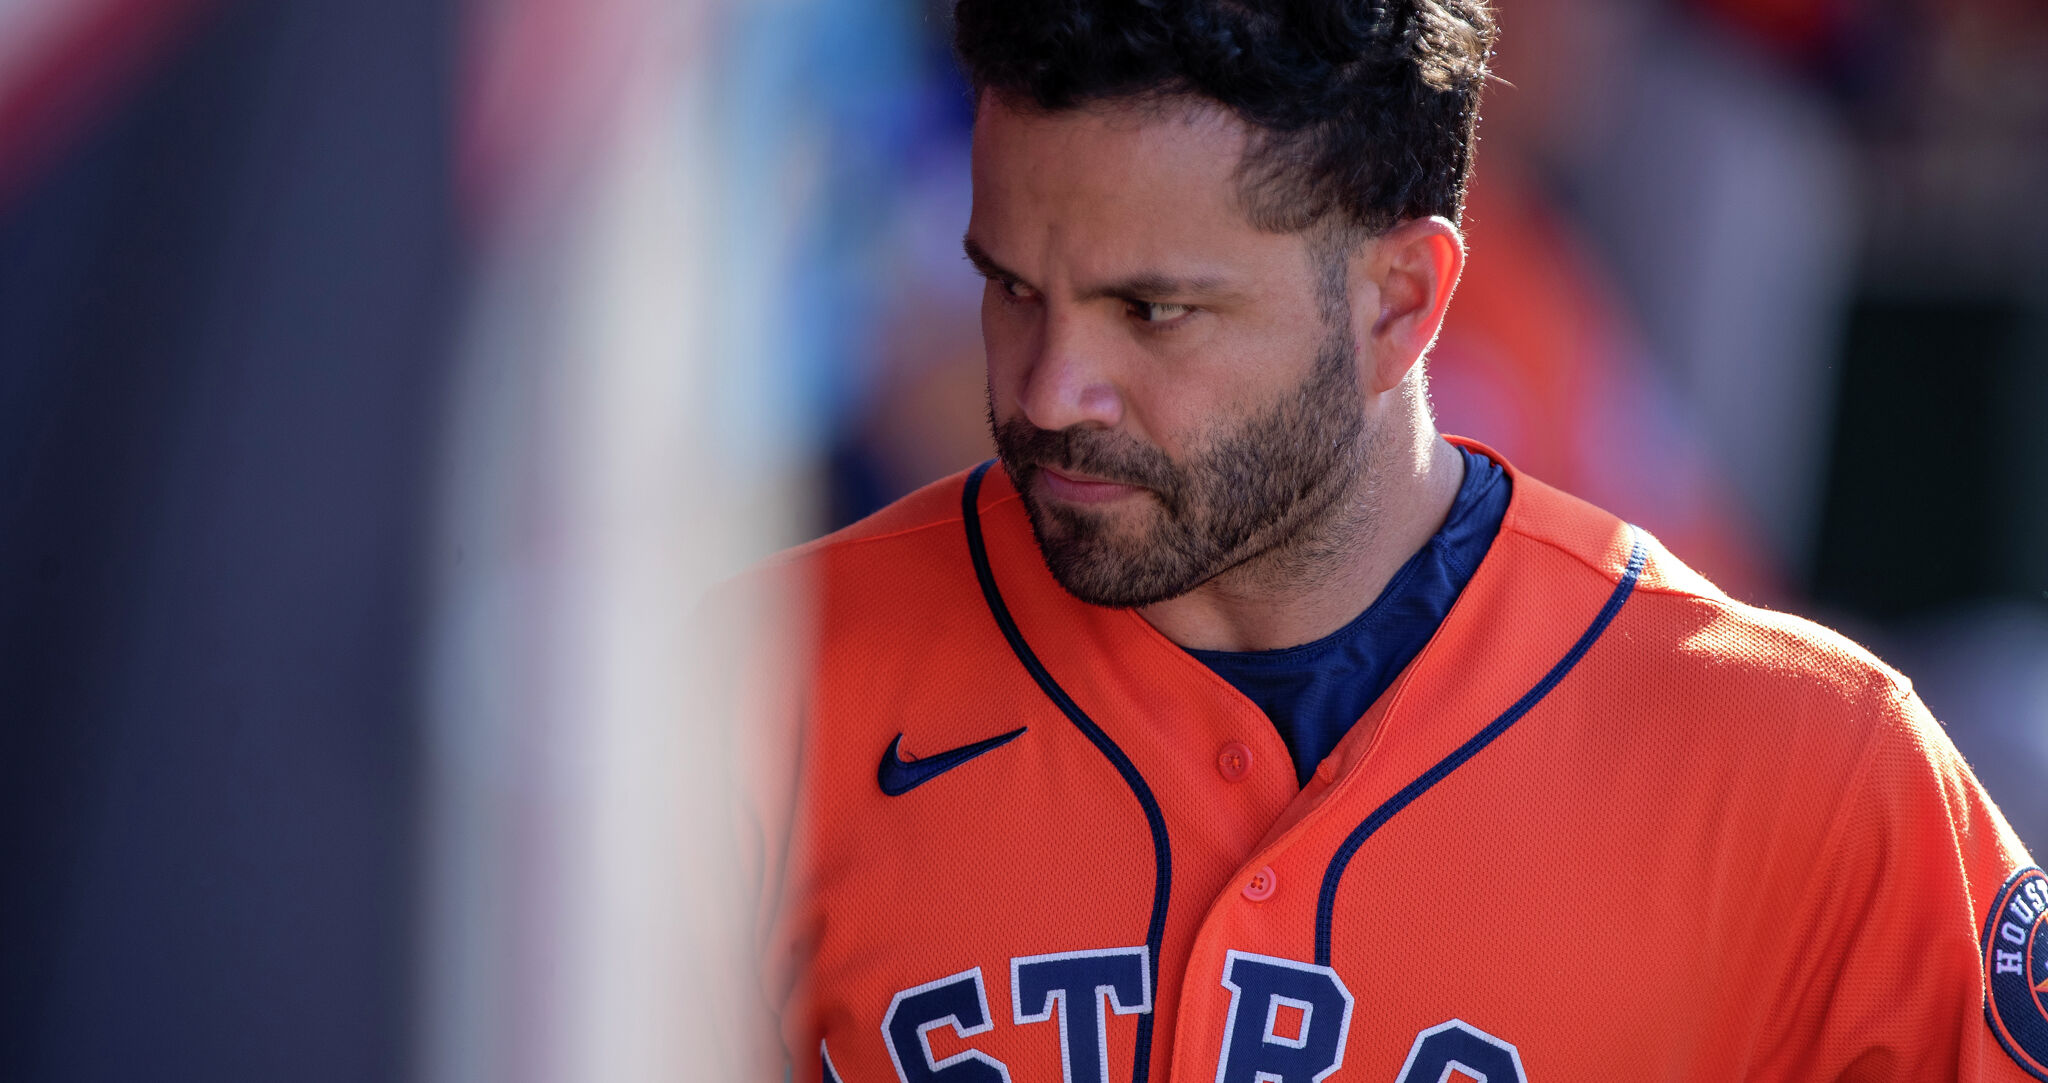 Houston Astros: Jose Altuve's return to lineup could be mere days away